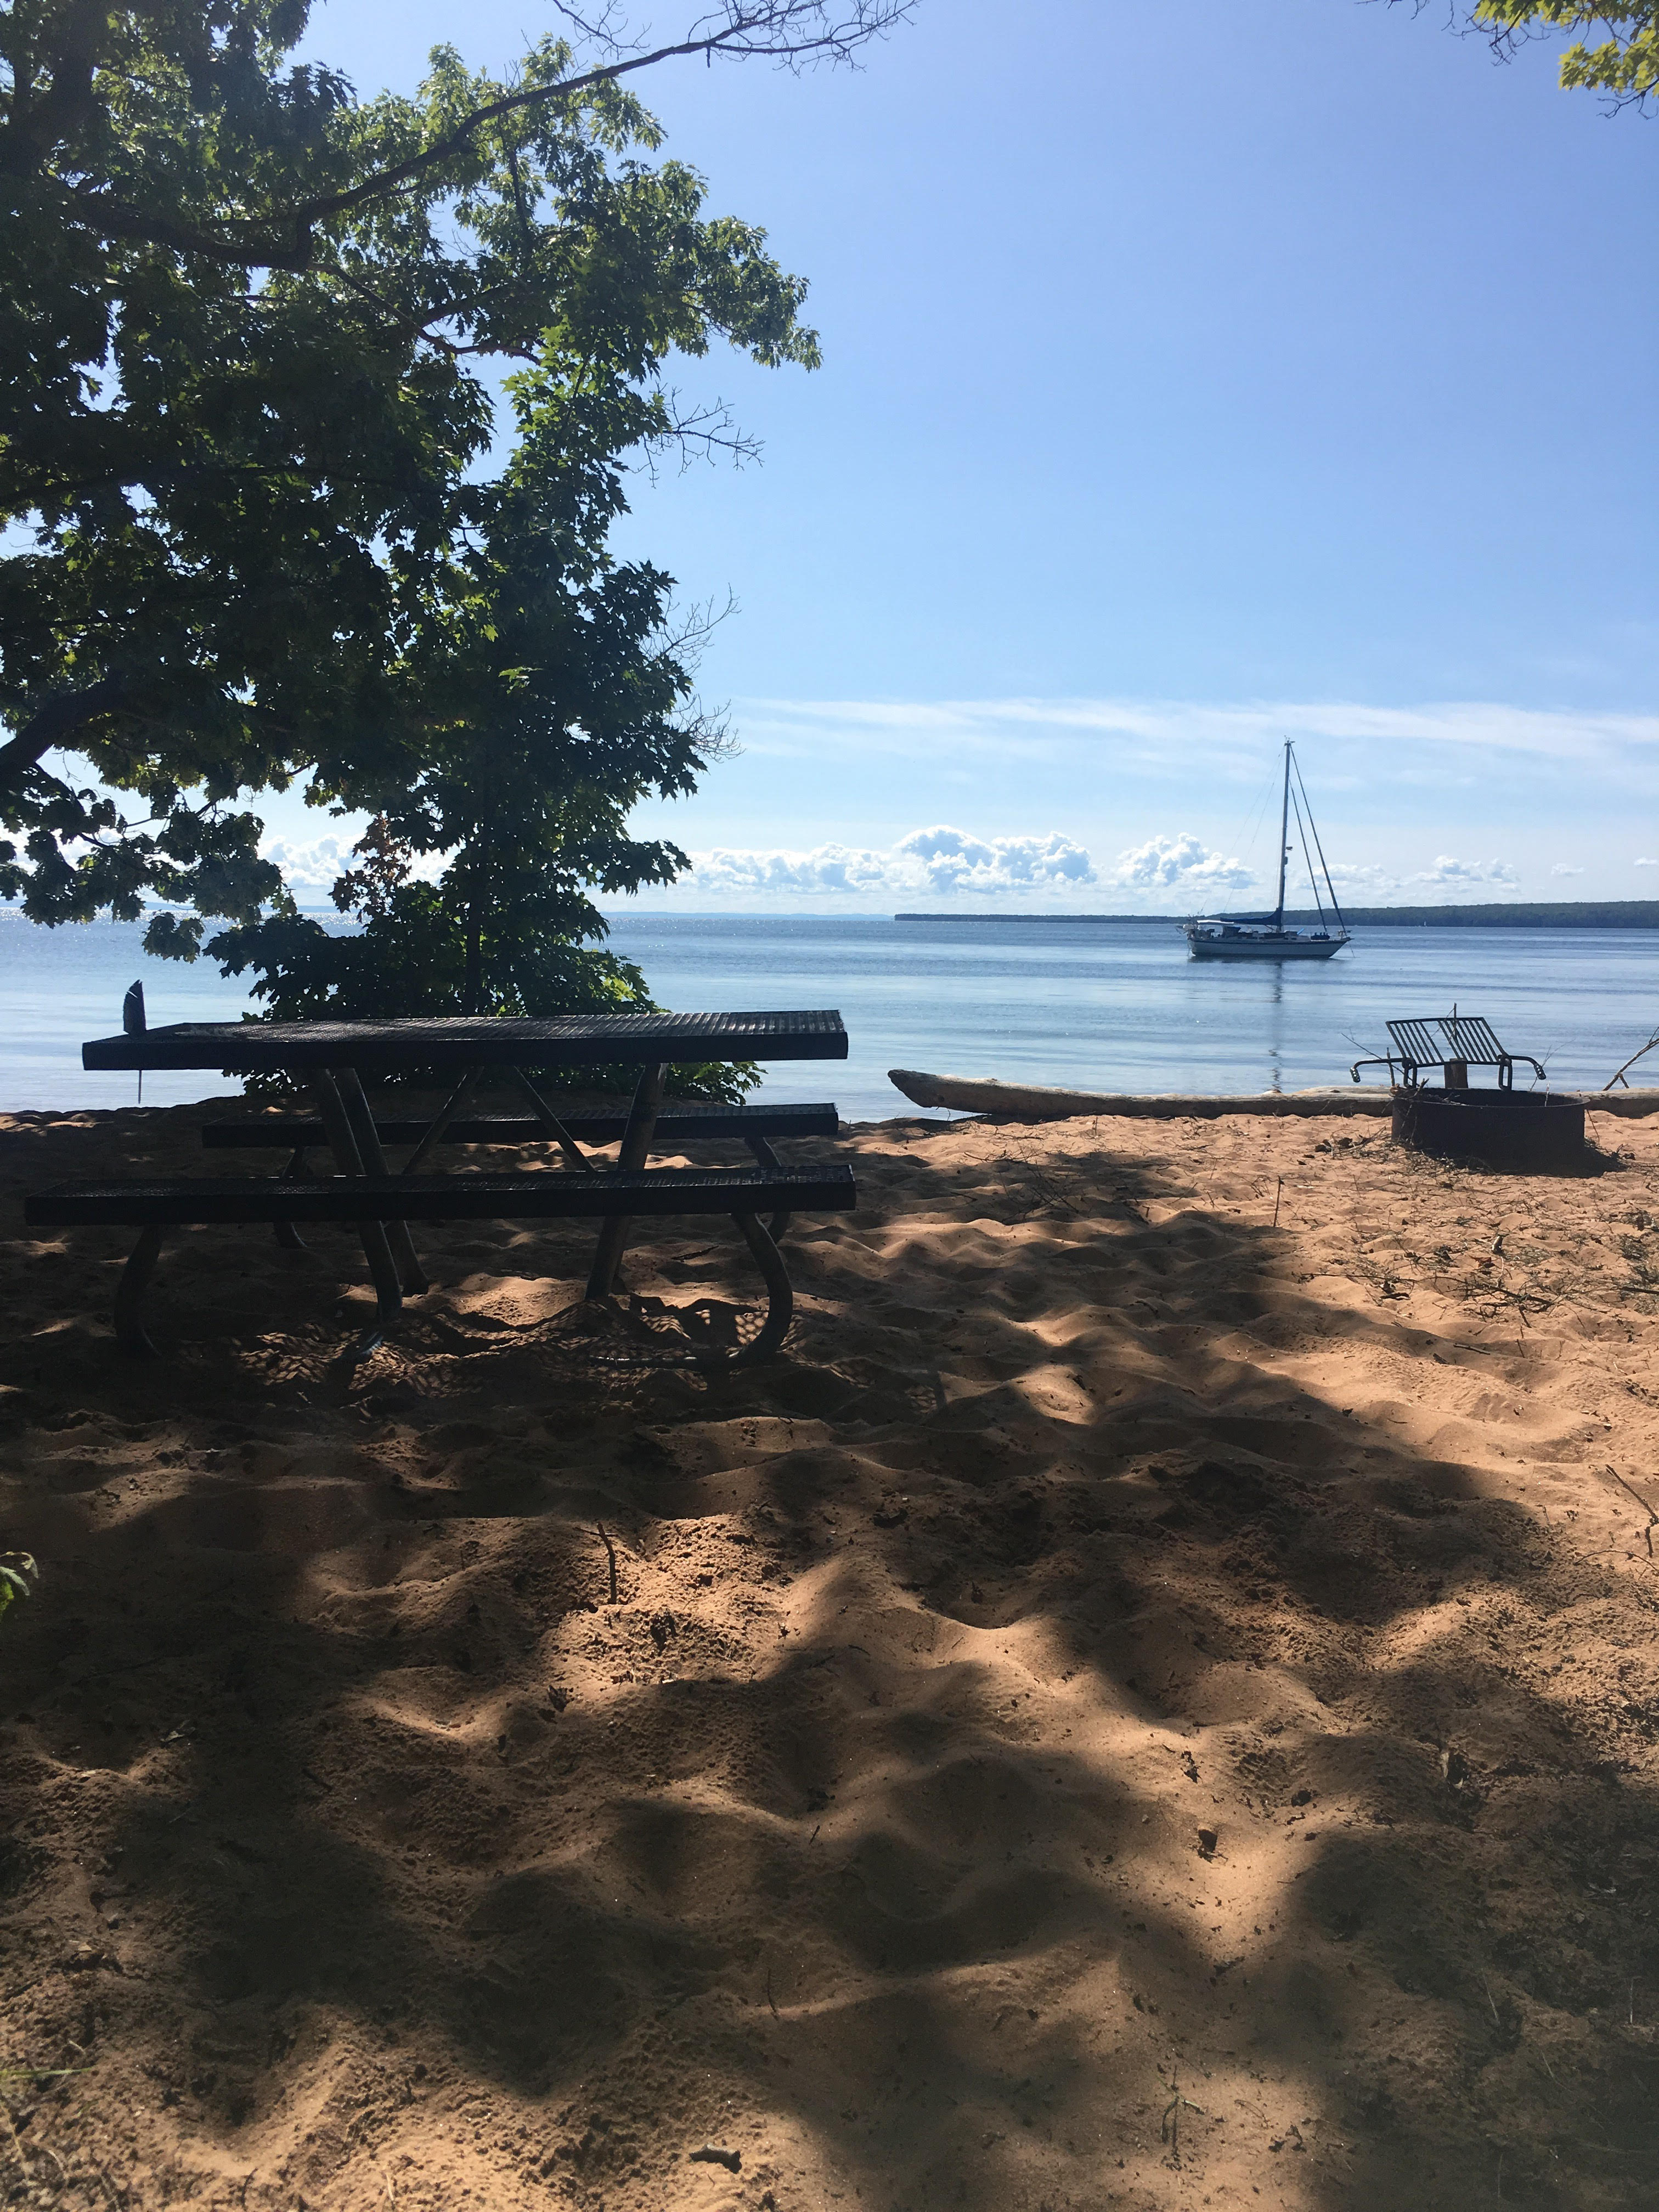 Camping In The Apostles Apostle Islands National Lakeshore U S National Park Service